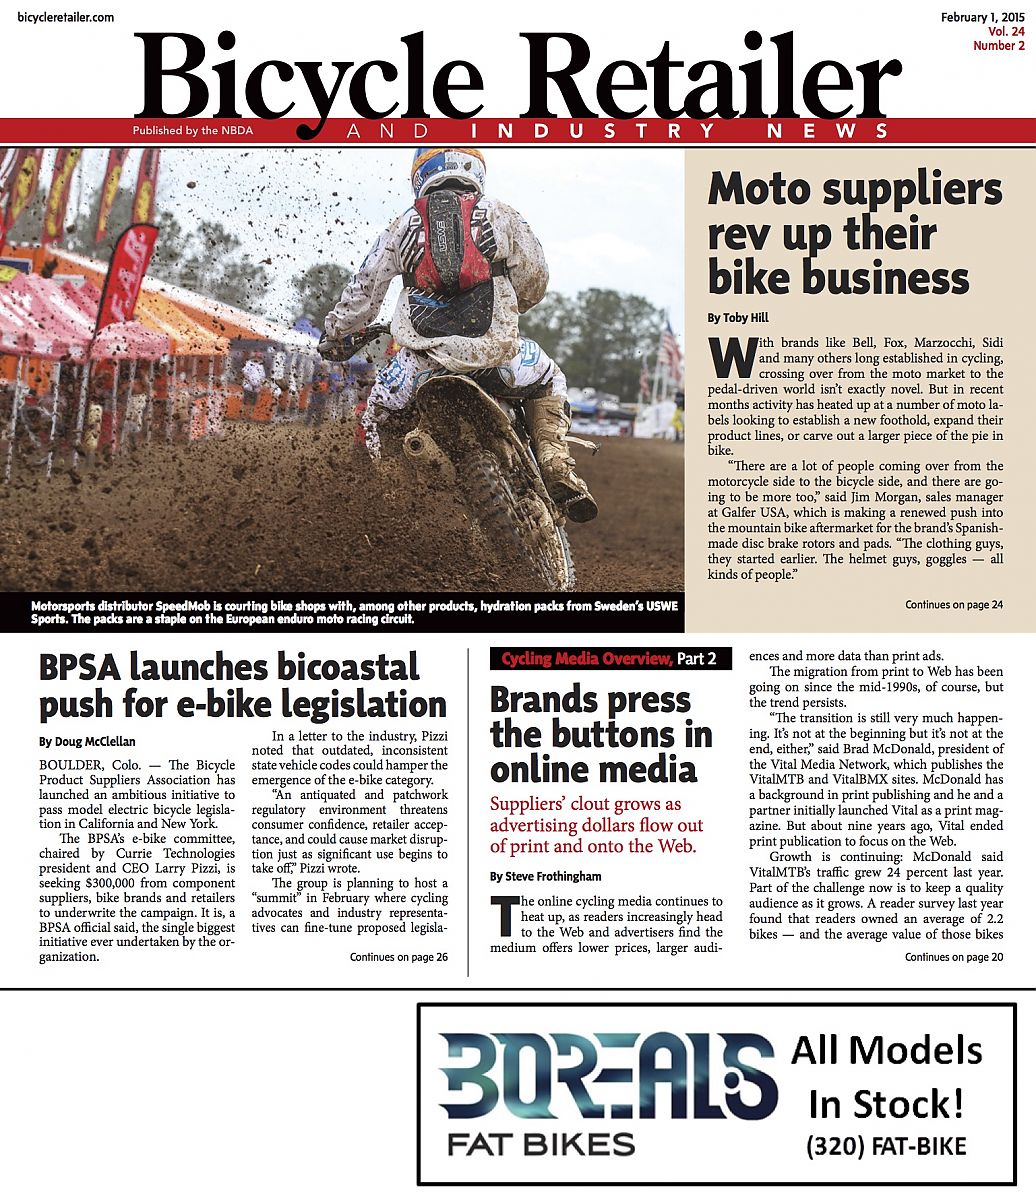 New BRAIN issue looks at the moto invasion, online cycling media and e-bike legislation Bicycle Retailer and Industry News